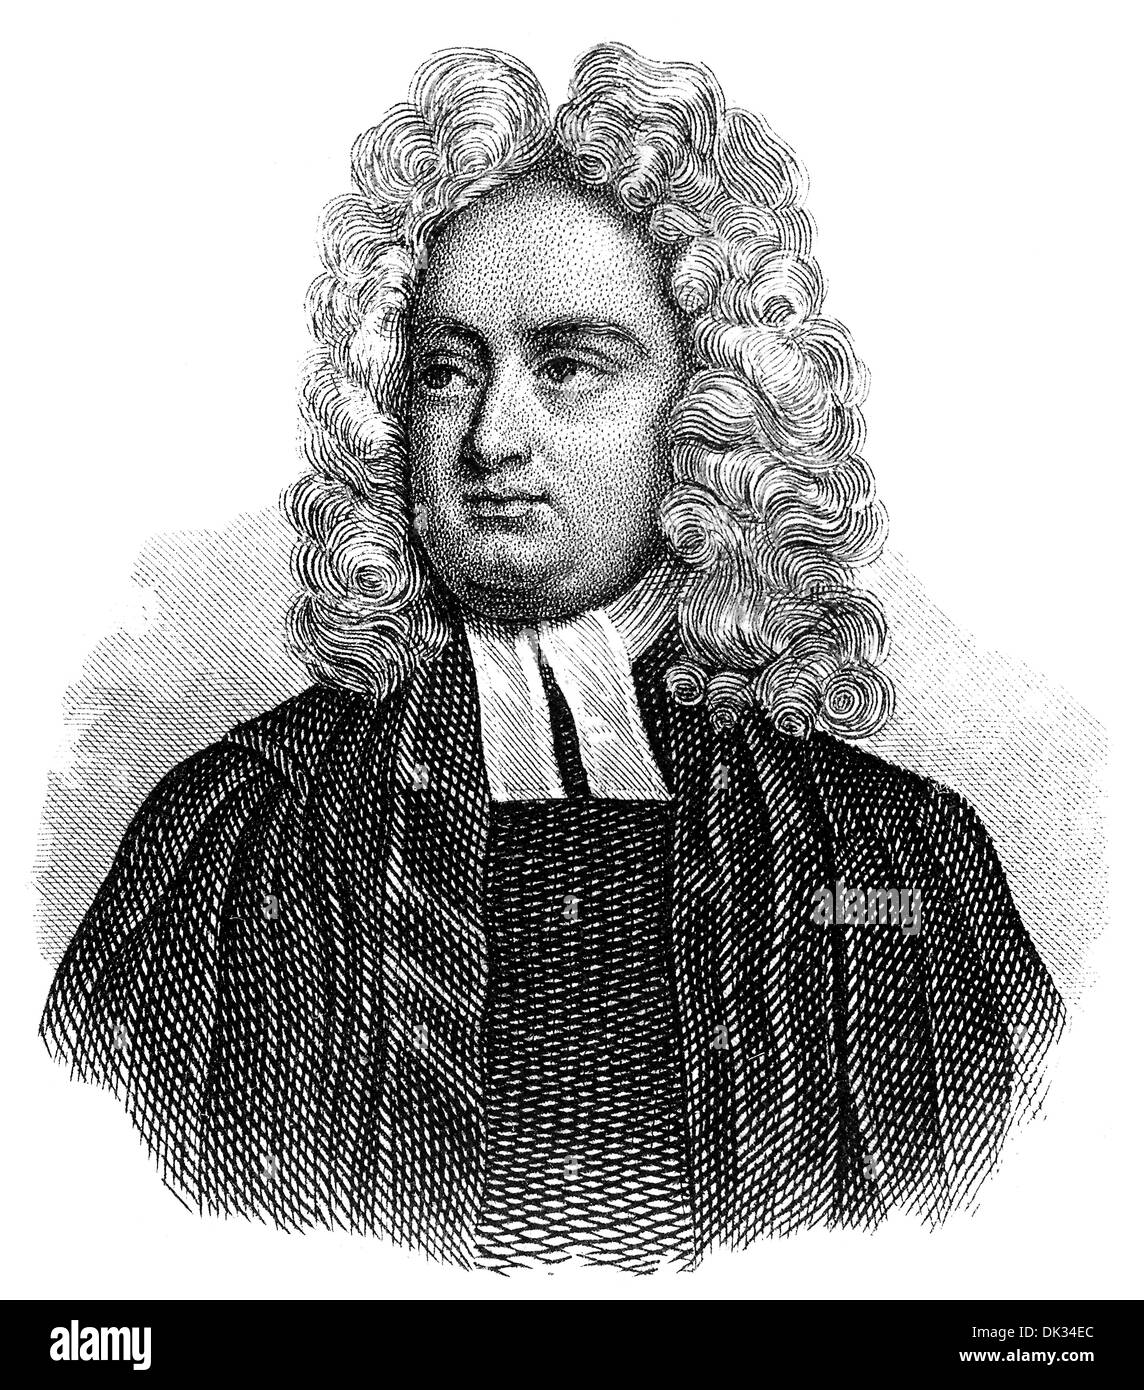 Jonathan Swift or Isaac Bickerstaff, 1667 - 1745, an Irish writer and satirist of the early Enlightenment, author of Gulliver's Stock Photo